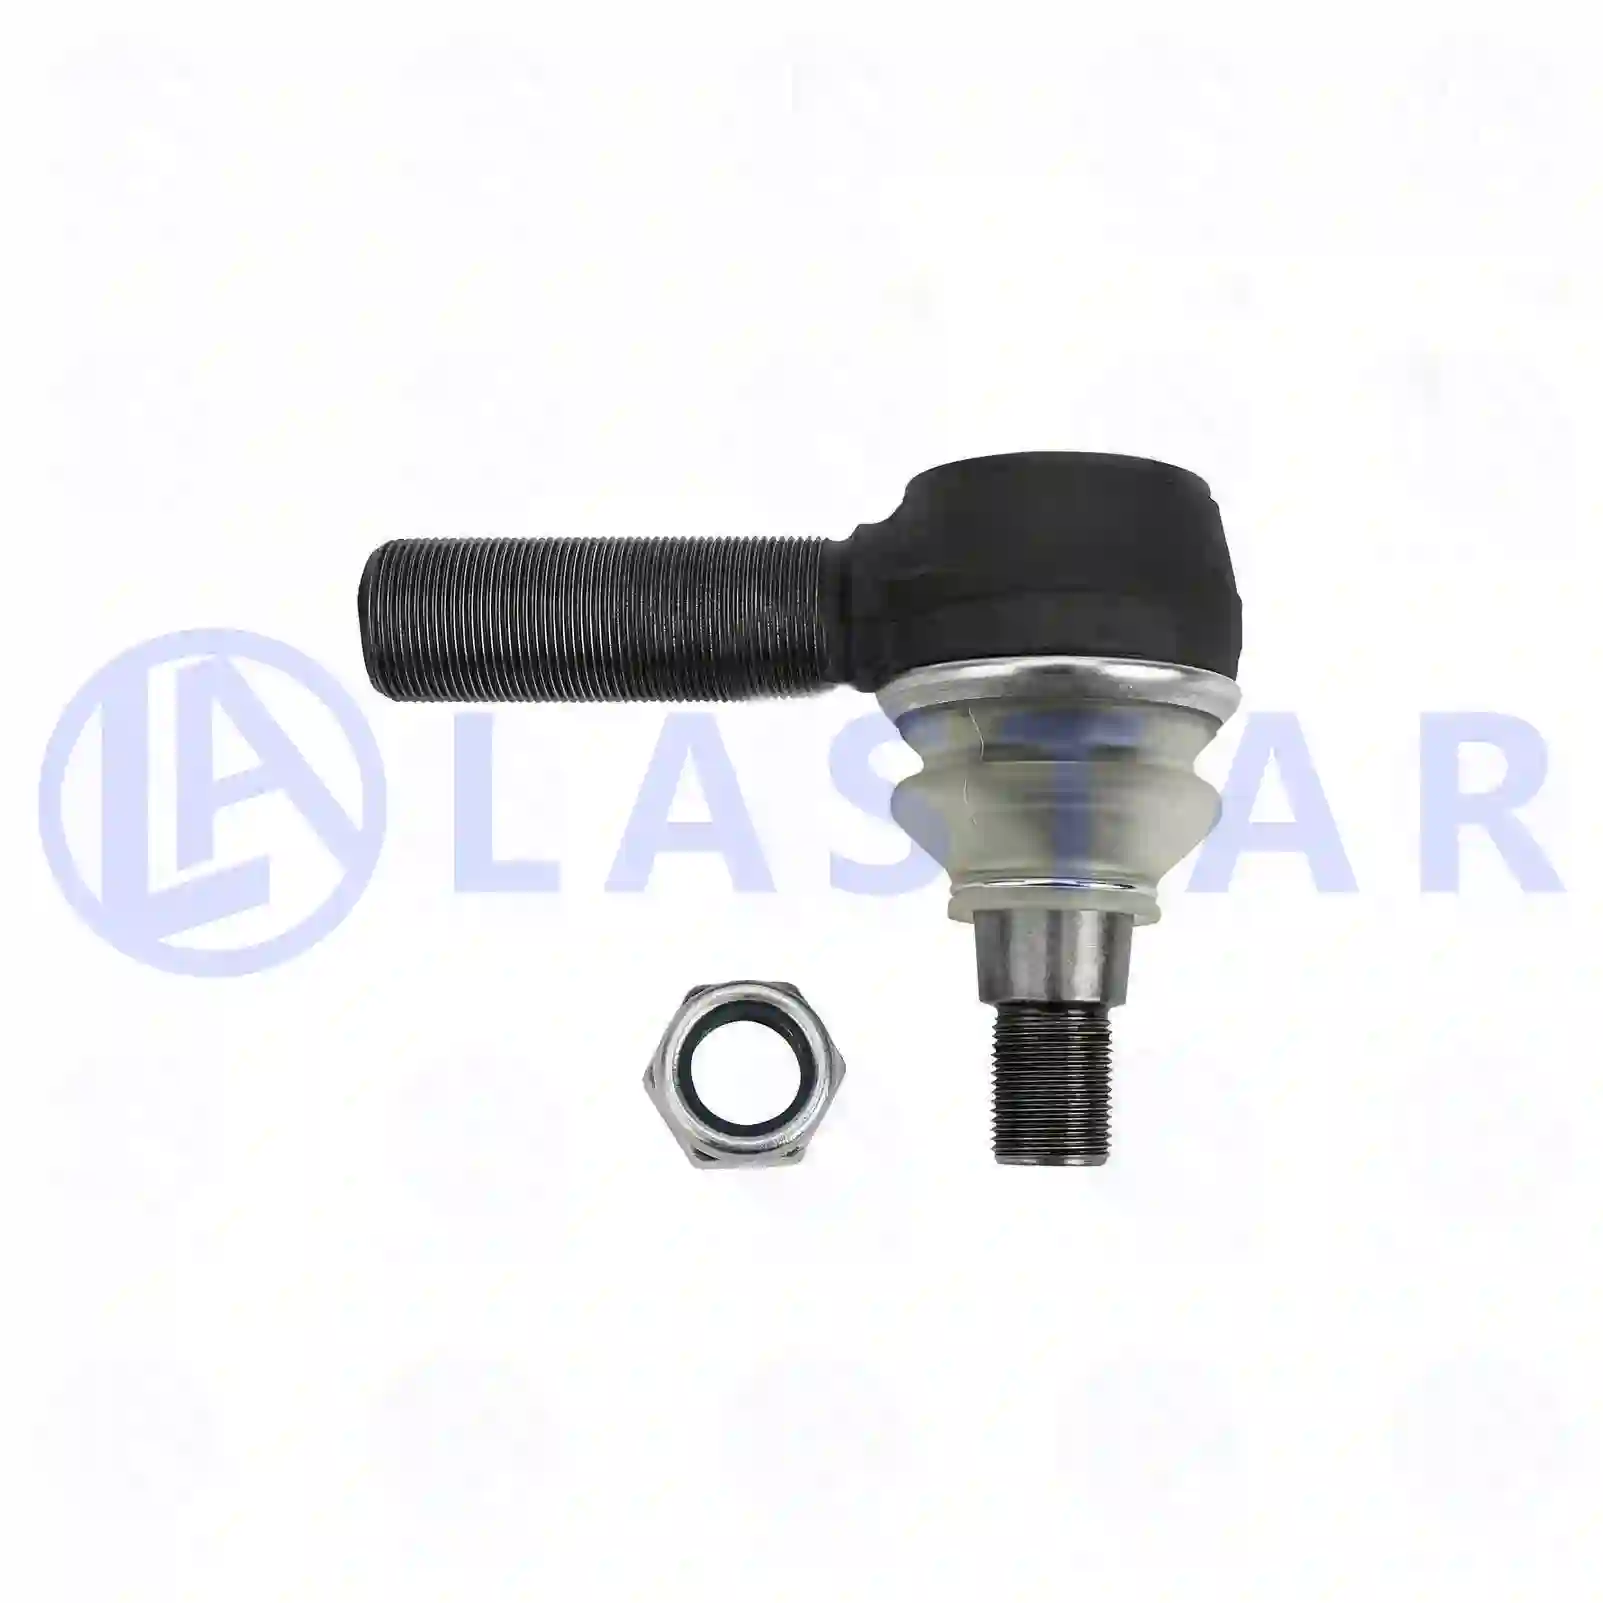 Ball joint, right hand thread, 77705334, 0014604248, 0014605048, 0014608548, 0014608948, 0024600548, ZG40393-0008 ||  77705334 Lastar Spare Part | Truck Spare Parts, Auotomotive Spare Parts Ball joint, right hand thread, 77705334, 0014604248, 0014605048, 0014608548, 0014608948, 0024600548, ZG40393-0008 ||  77705334 Lastar Spare Part | Truck Spare Parts, Auotomotive Spare Parts